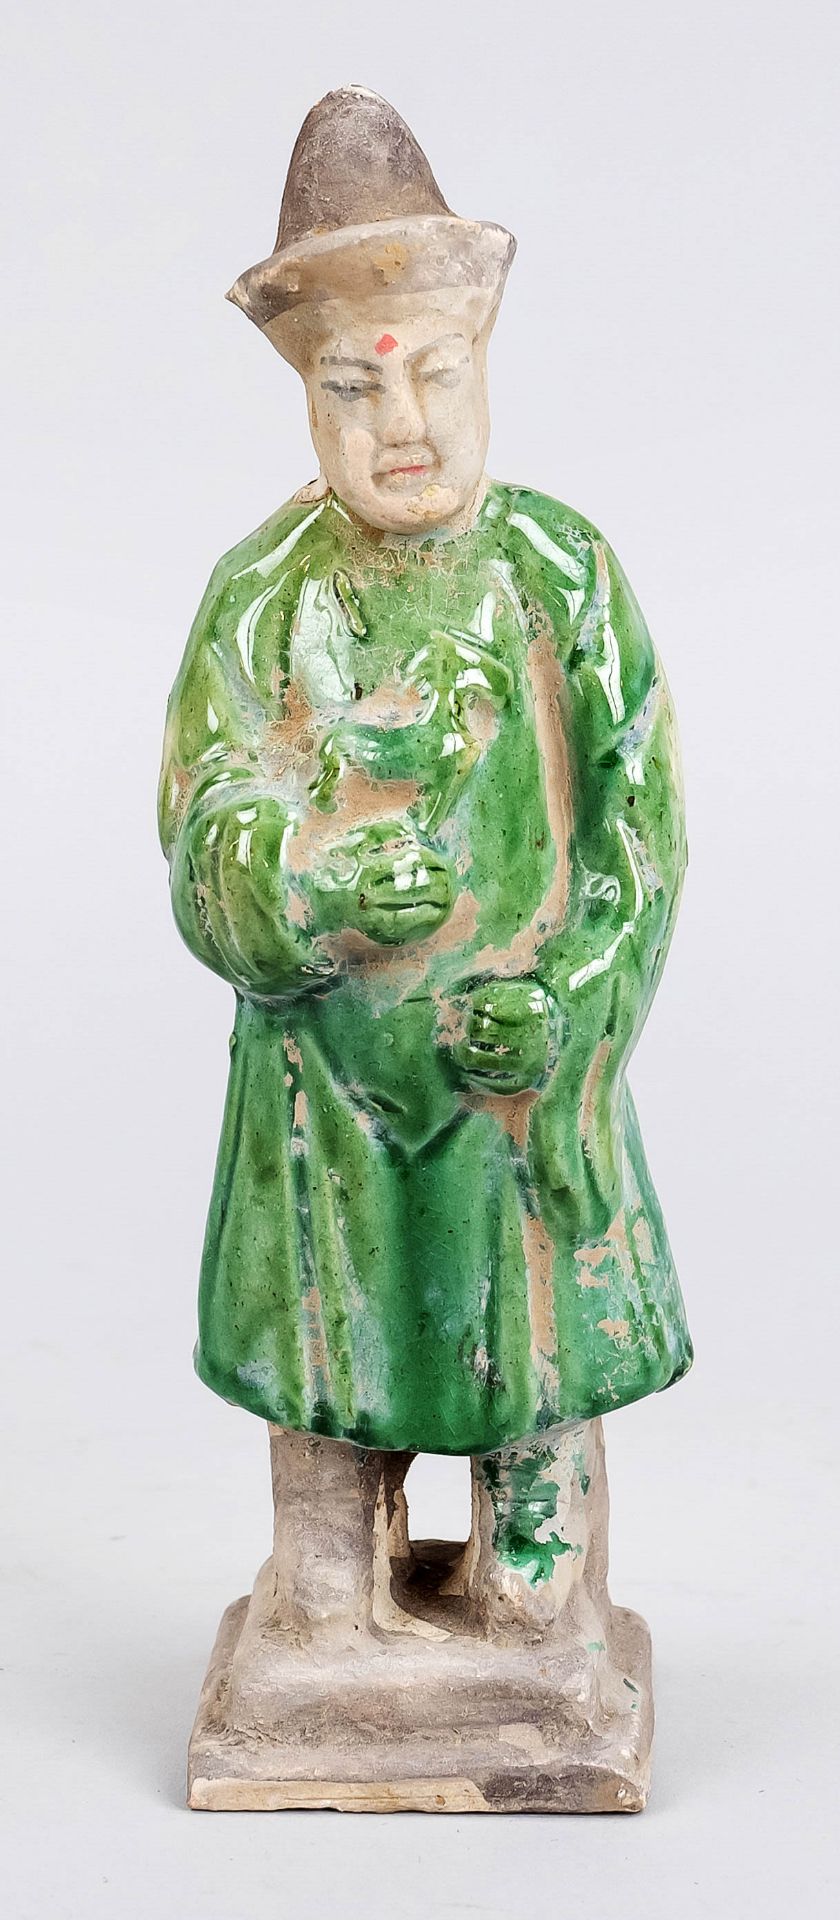 Mingqi tomb figure, China, Qing dynasty(1644-1912) 18th century or later, earthenware with cold